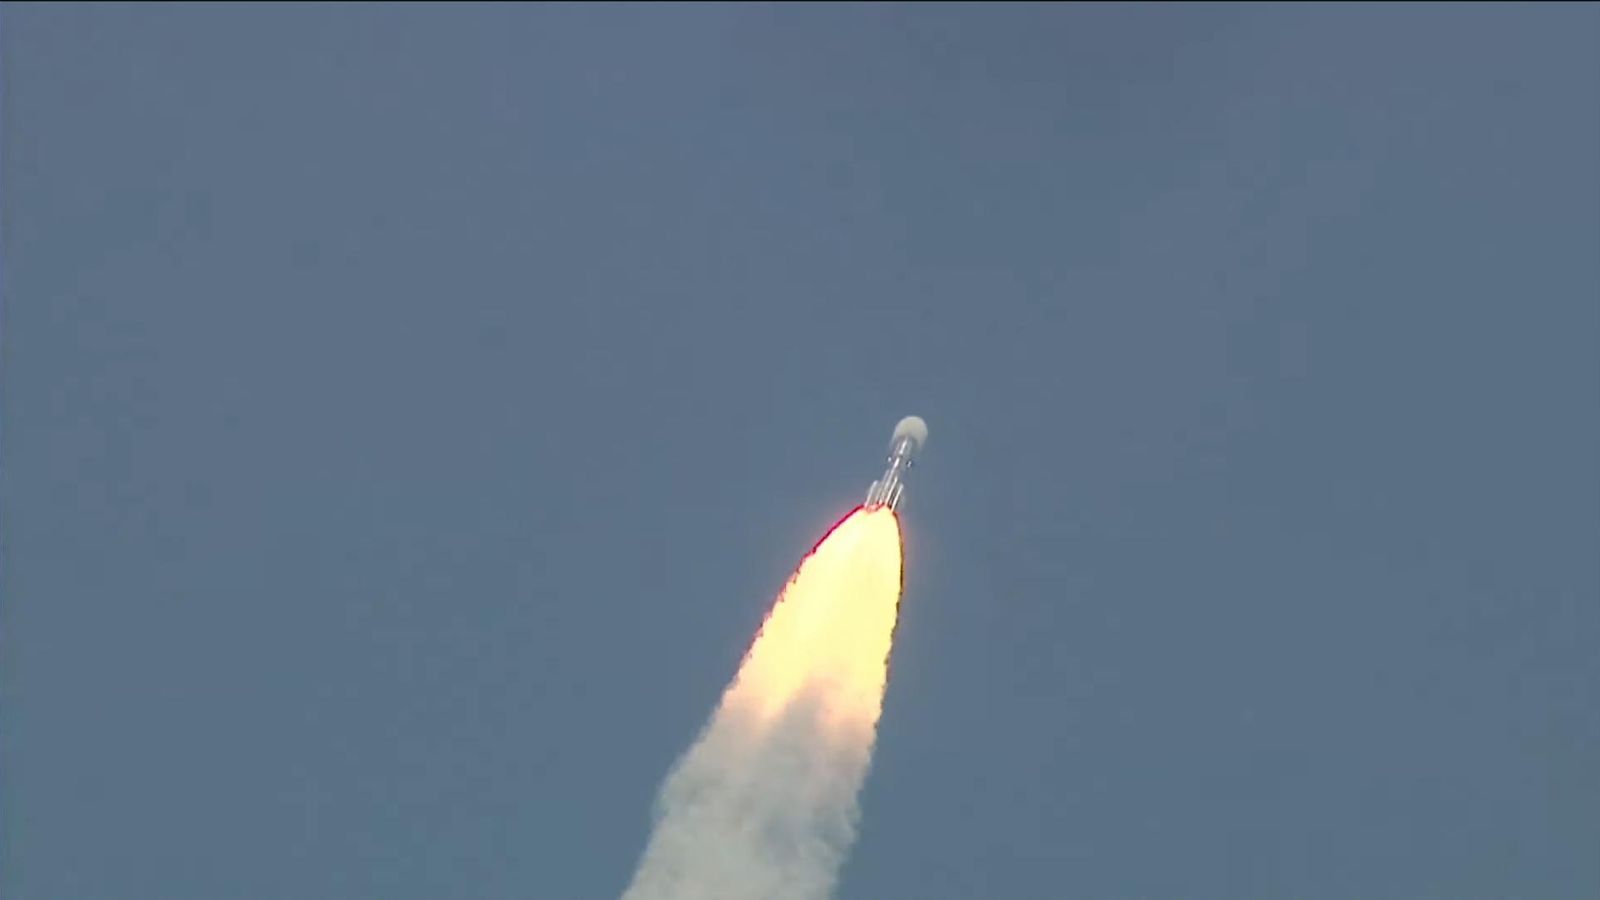 India launches rocket towards the sun after successful moon lander mission